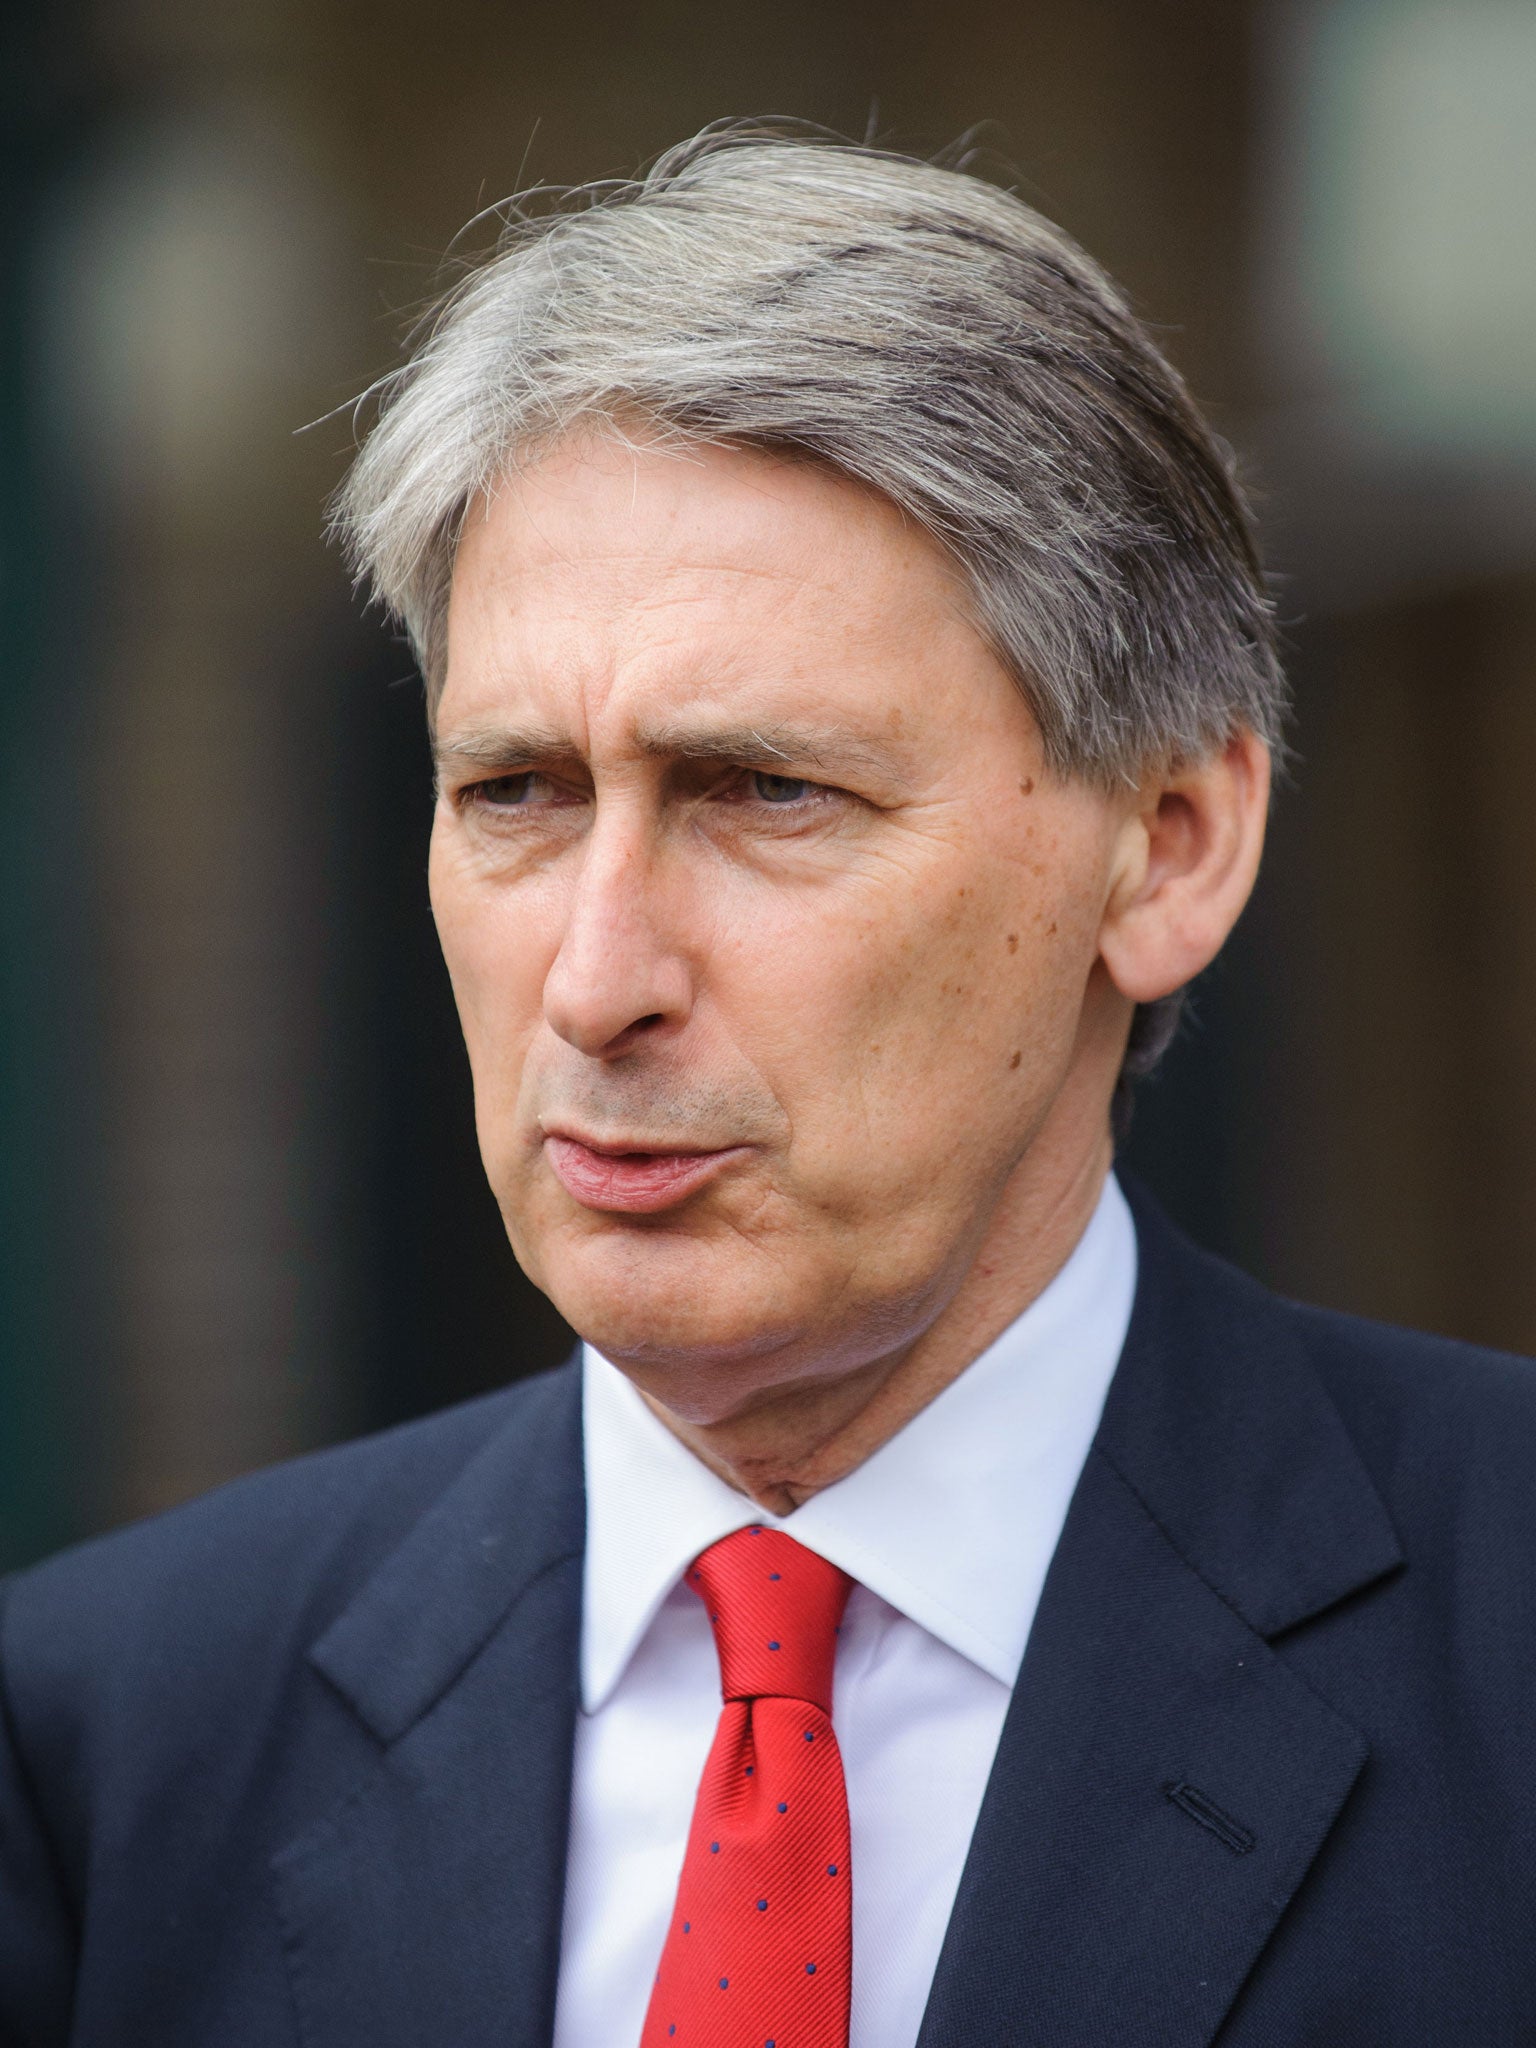 Proposed powers for police and security services to access email records would help prevent terrorists causing mayhem, Defence Secretary Philip Hammond said today